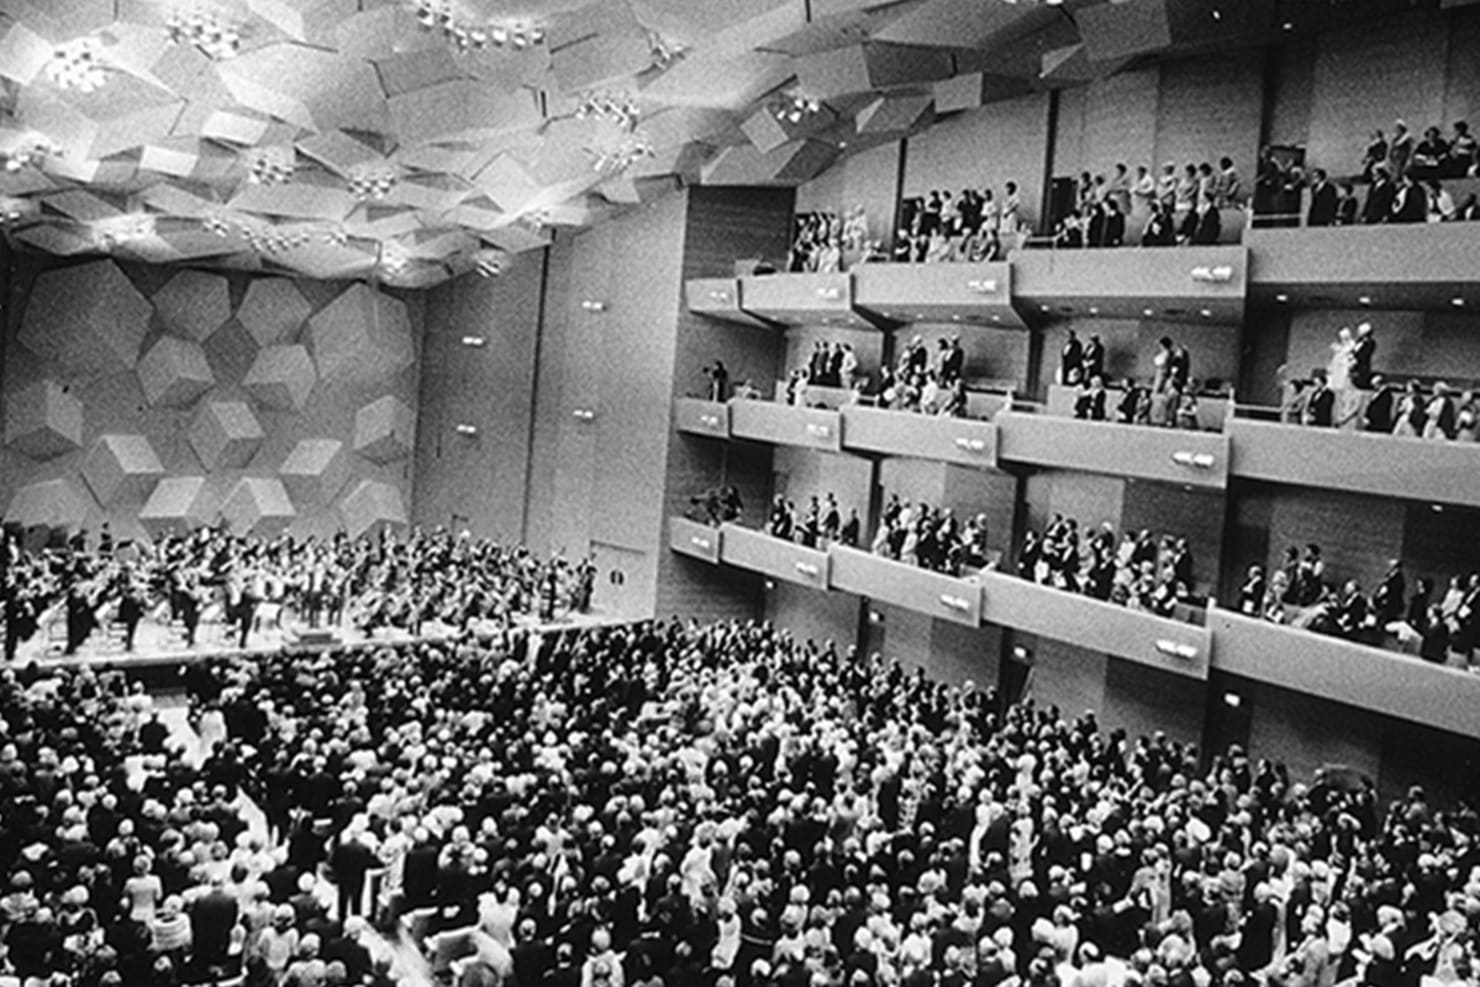 Black and white photo of Orchestra Hall in 1974